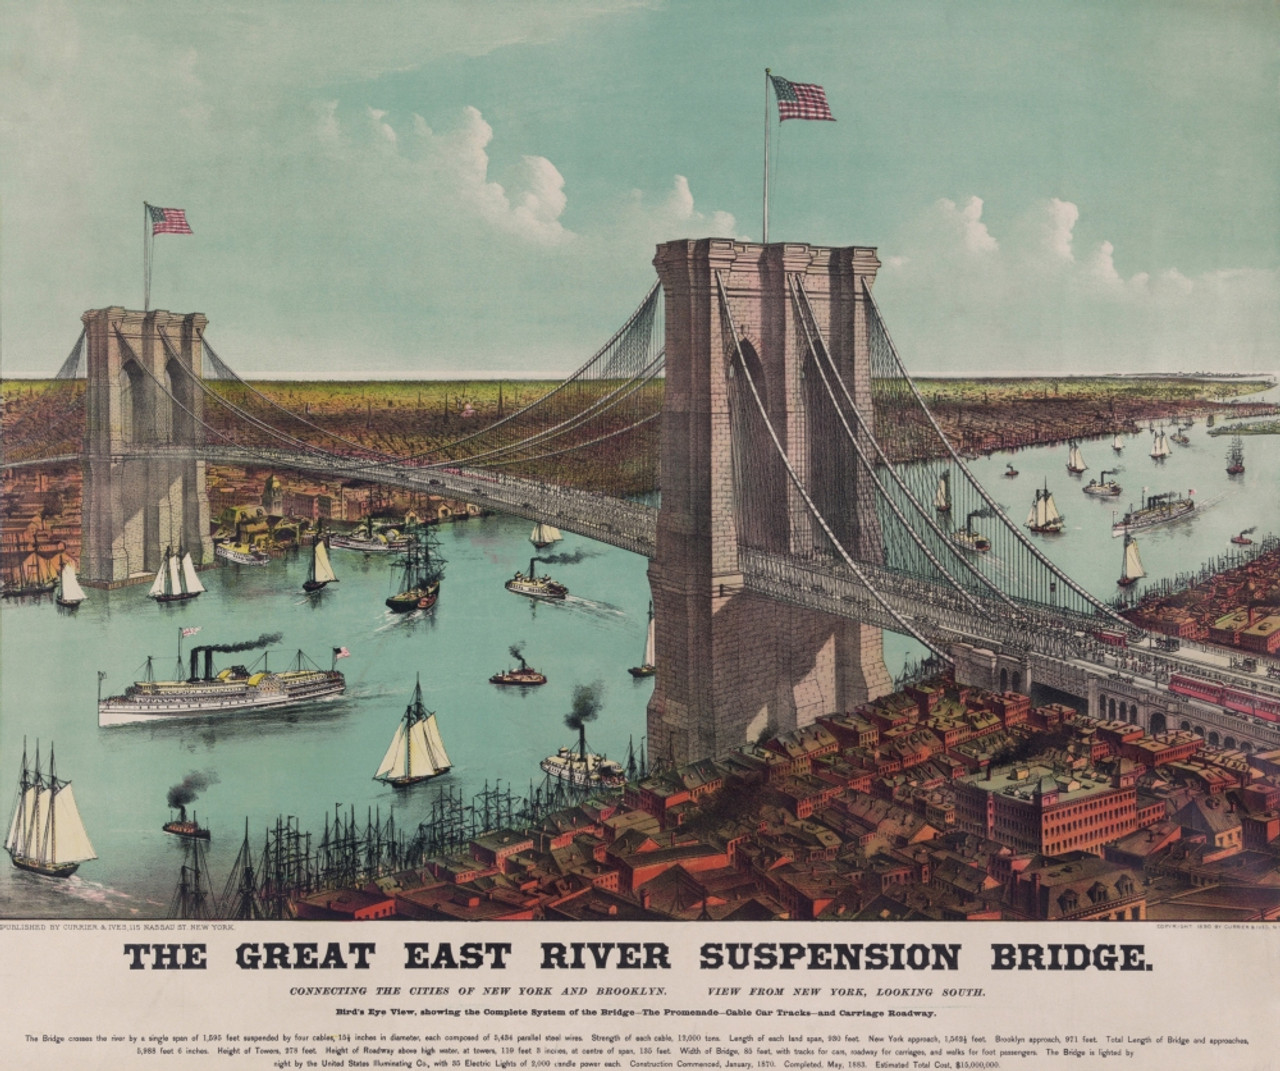 The Brooklyn Bridge Viewed From Manhattan Looking South Toward Brooklyn  Showing The Promenade Cable Car Tracks And Carriage Roadway. 1890  Chromolithograph By Currier Ives. Lc-Dig-Pga-03206 History - Item #  VAREVCHISL023EC020 - Posterazzi